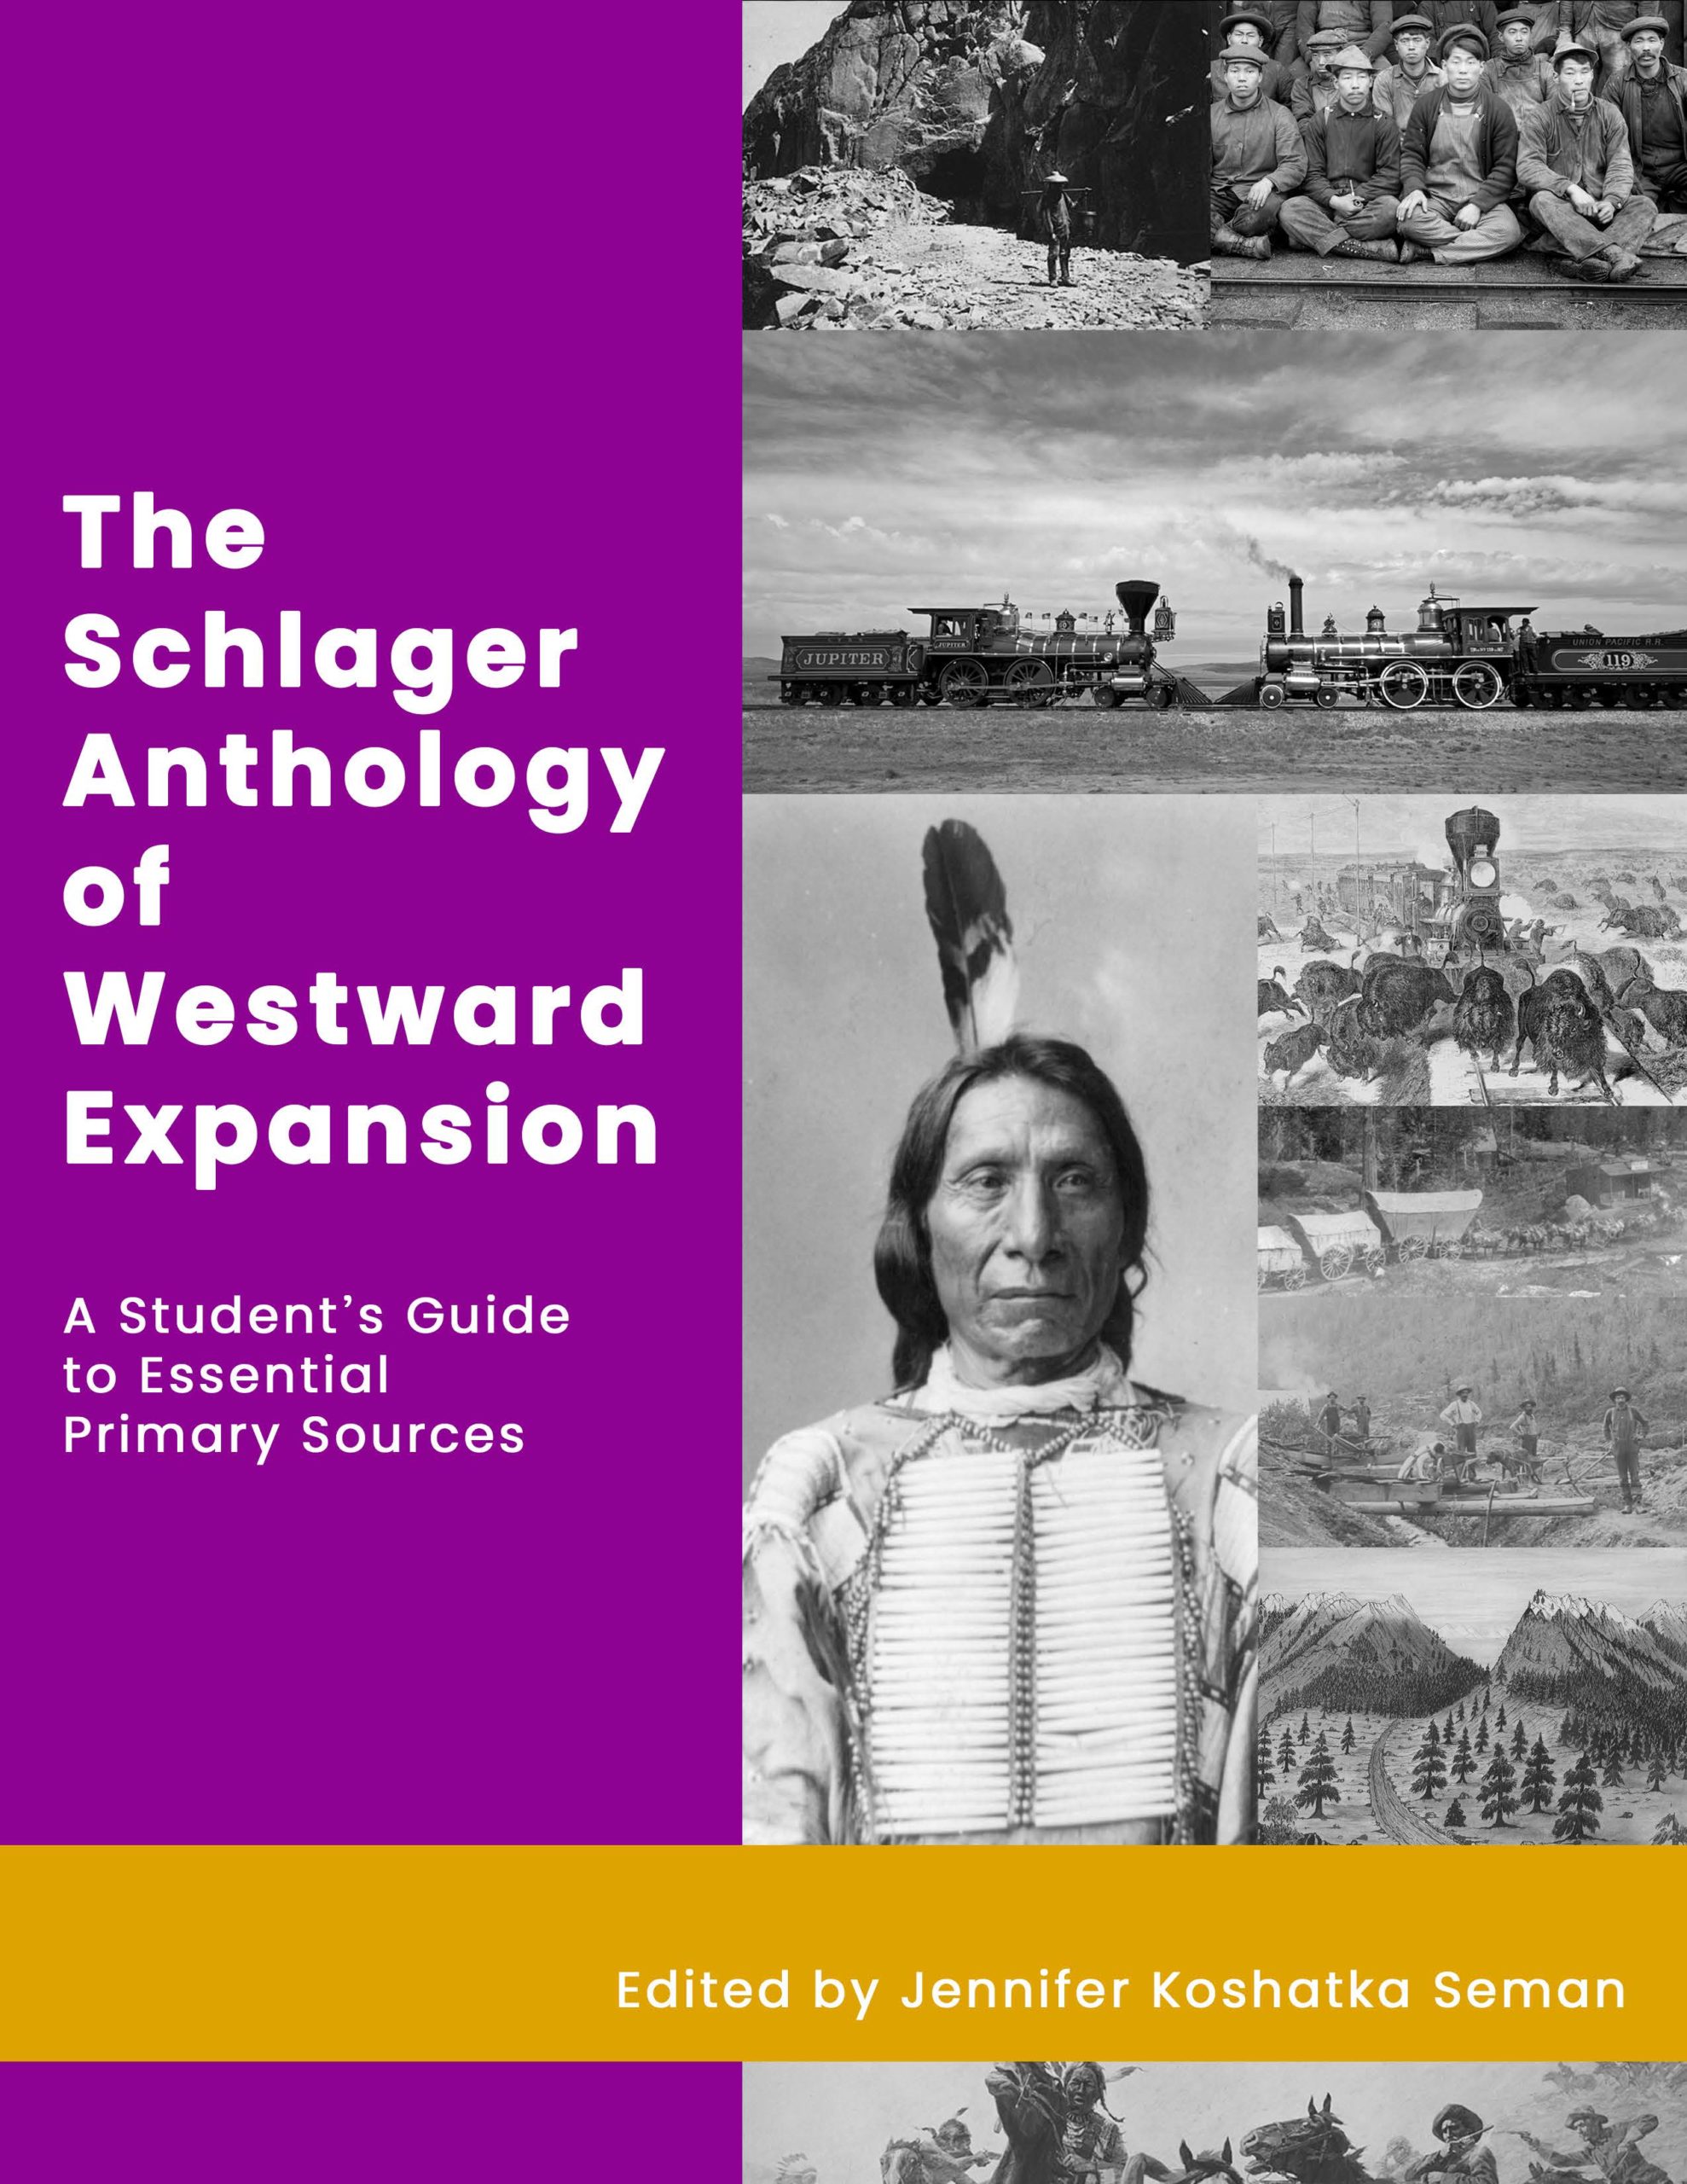 The Schlager Anthology of Westward Expansion: A Student’s Guide to Essential Primary Sources